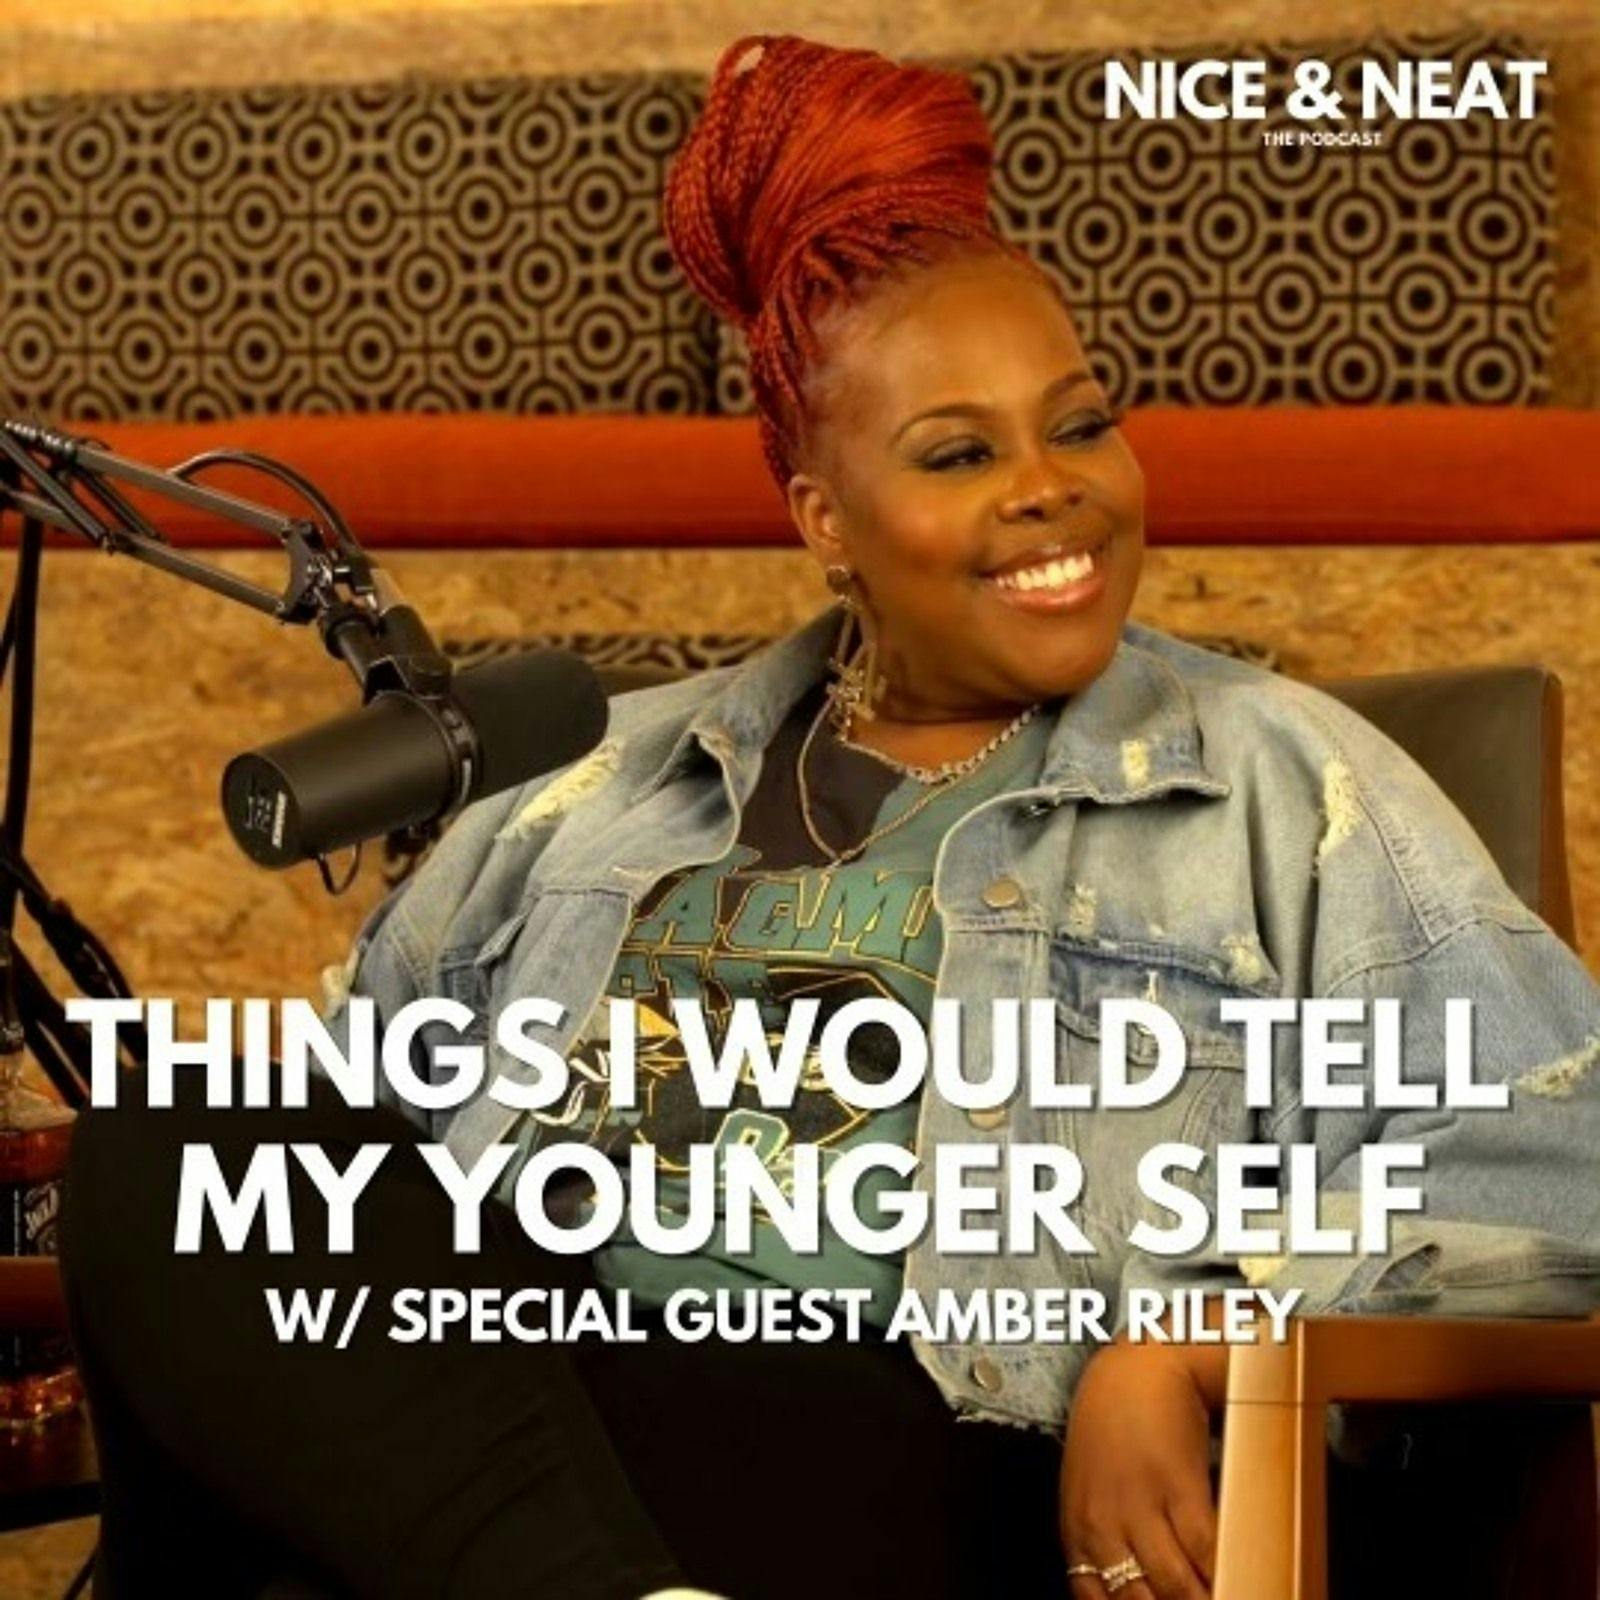 THINGS I WOULD TELL MY YOUNGER SELF W/ SPECIAL GUEST AMBER RILEY(S4,E4)